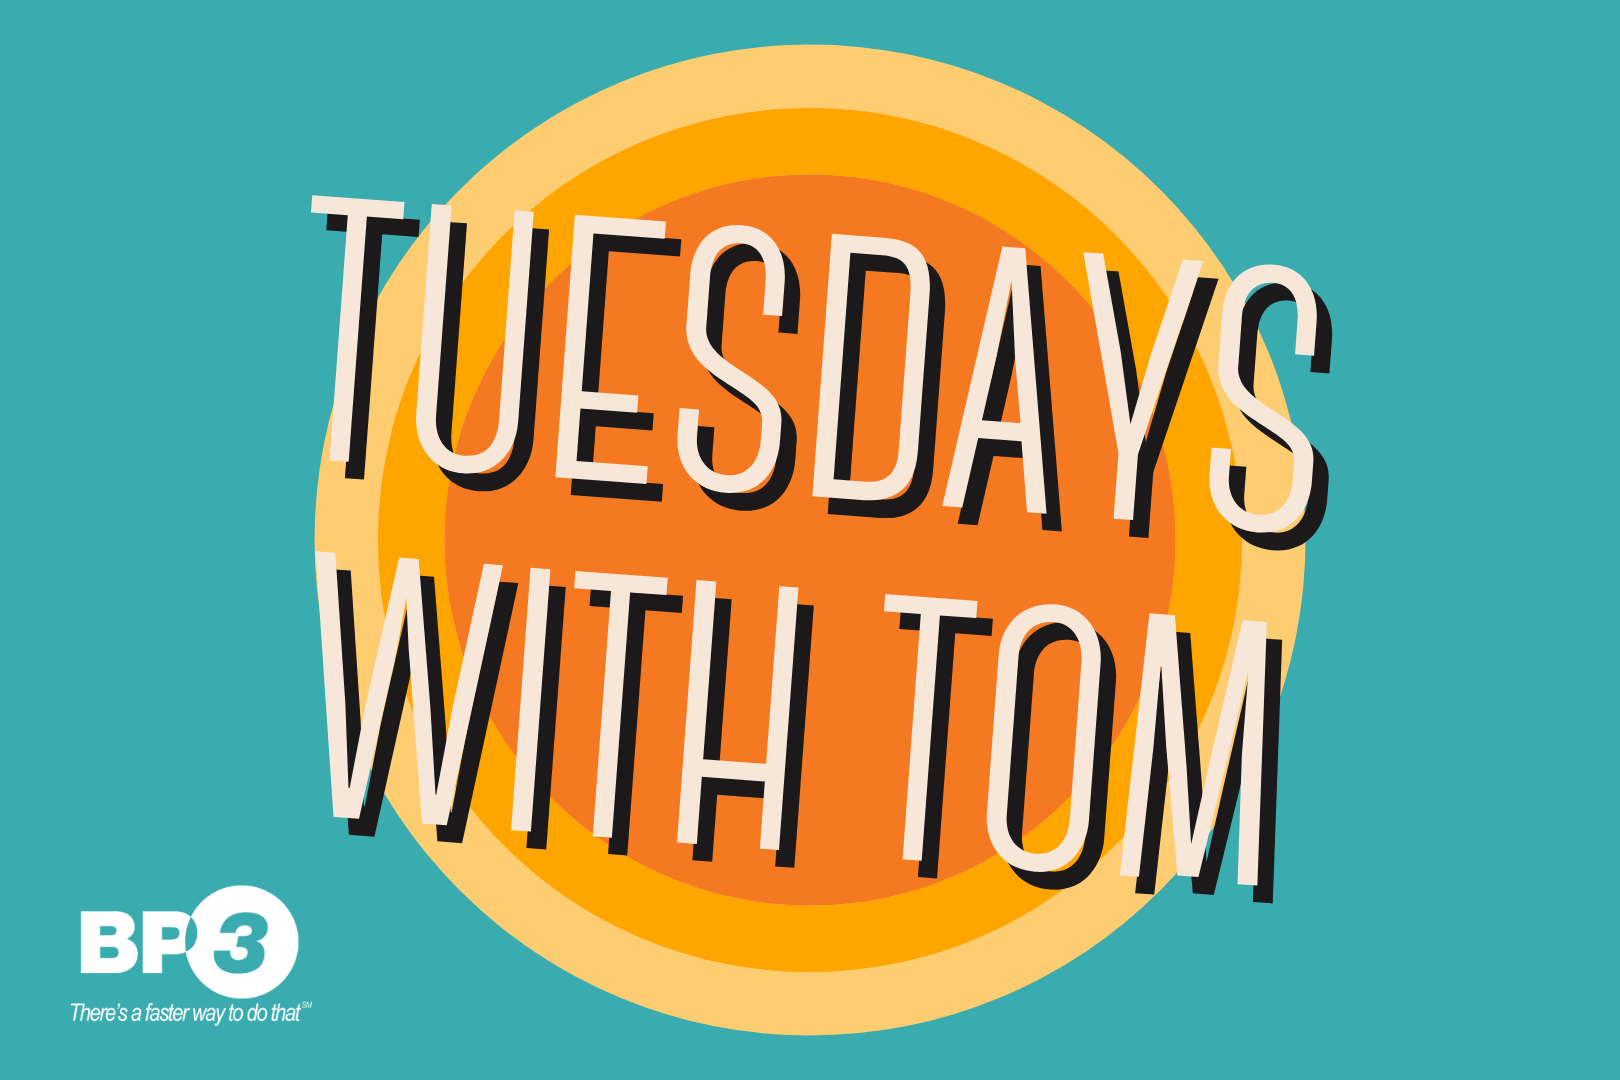 Tuesdays With Tom - What's an Intelligent Document Processing Pipeline?